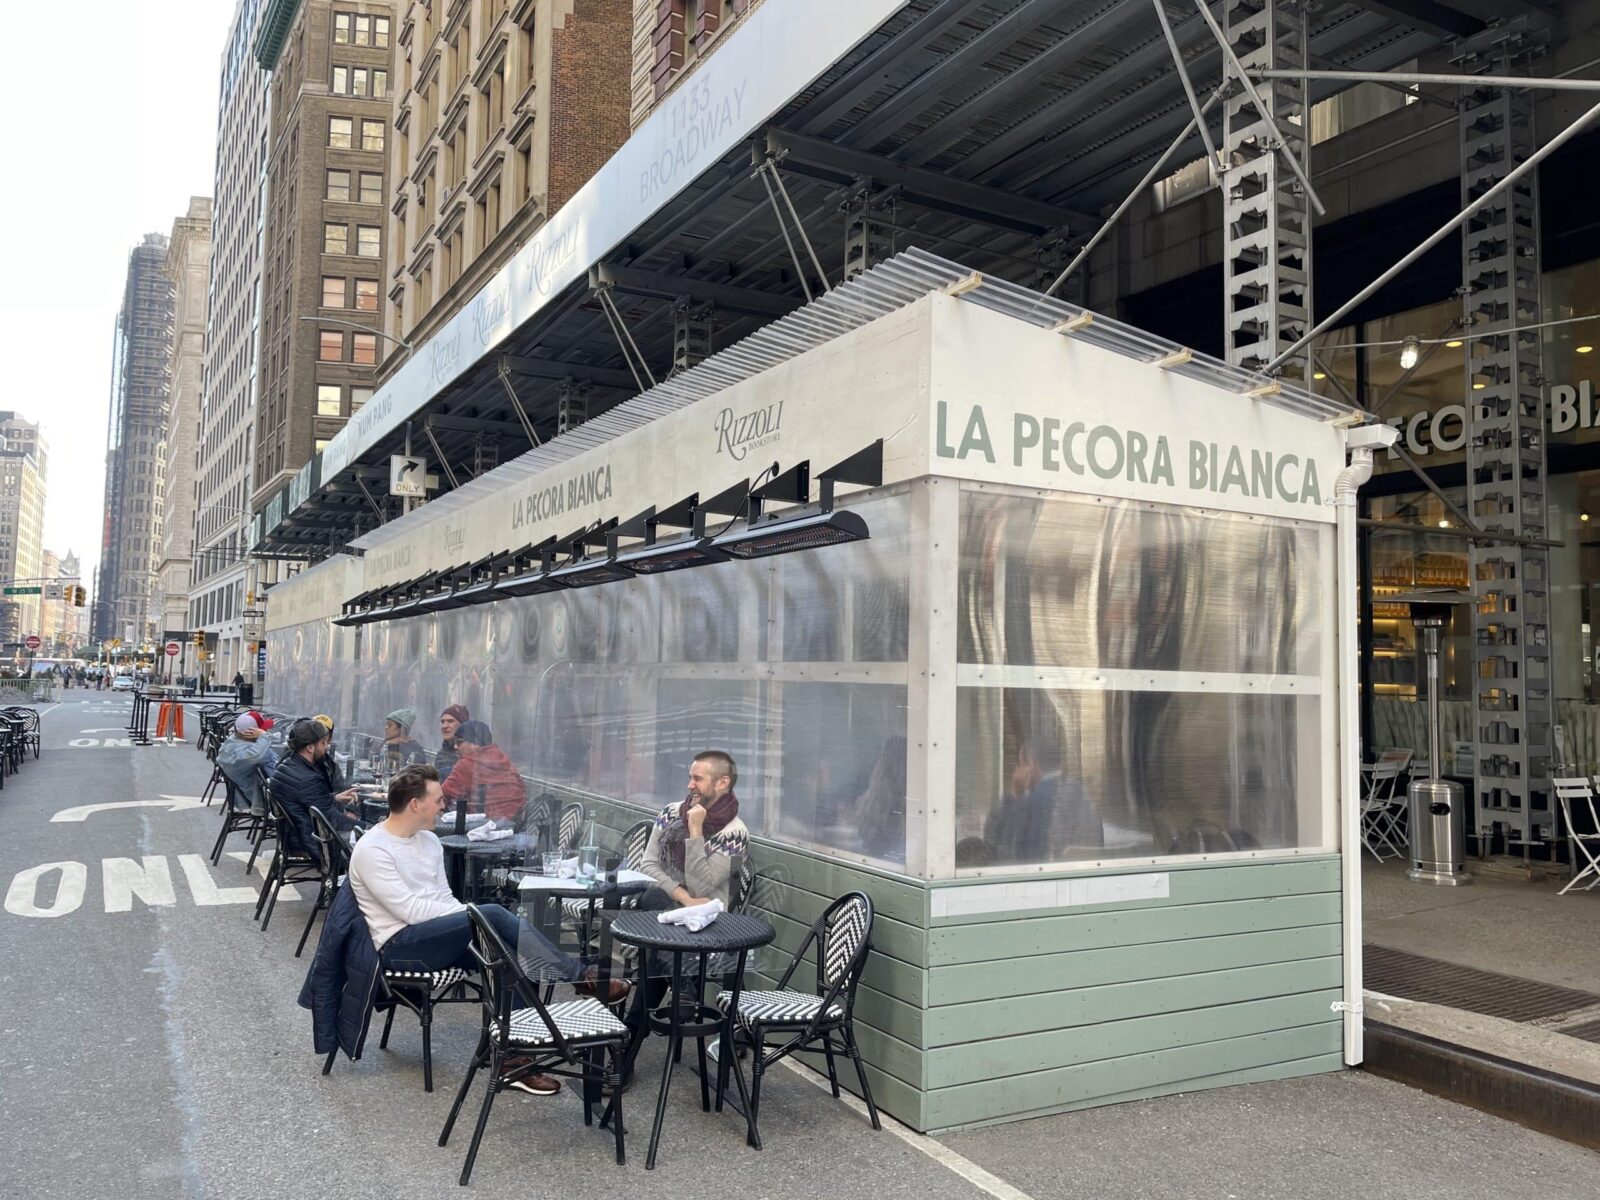 Restaurant seating spread outside onto the road in New York with electric heaters